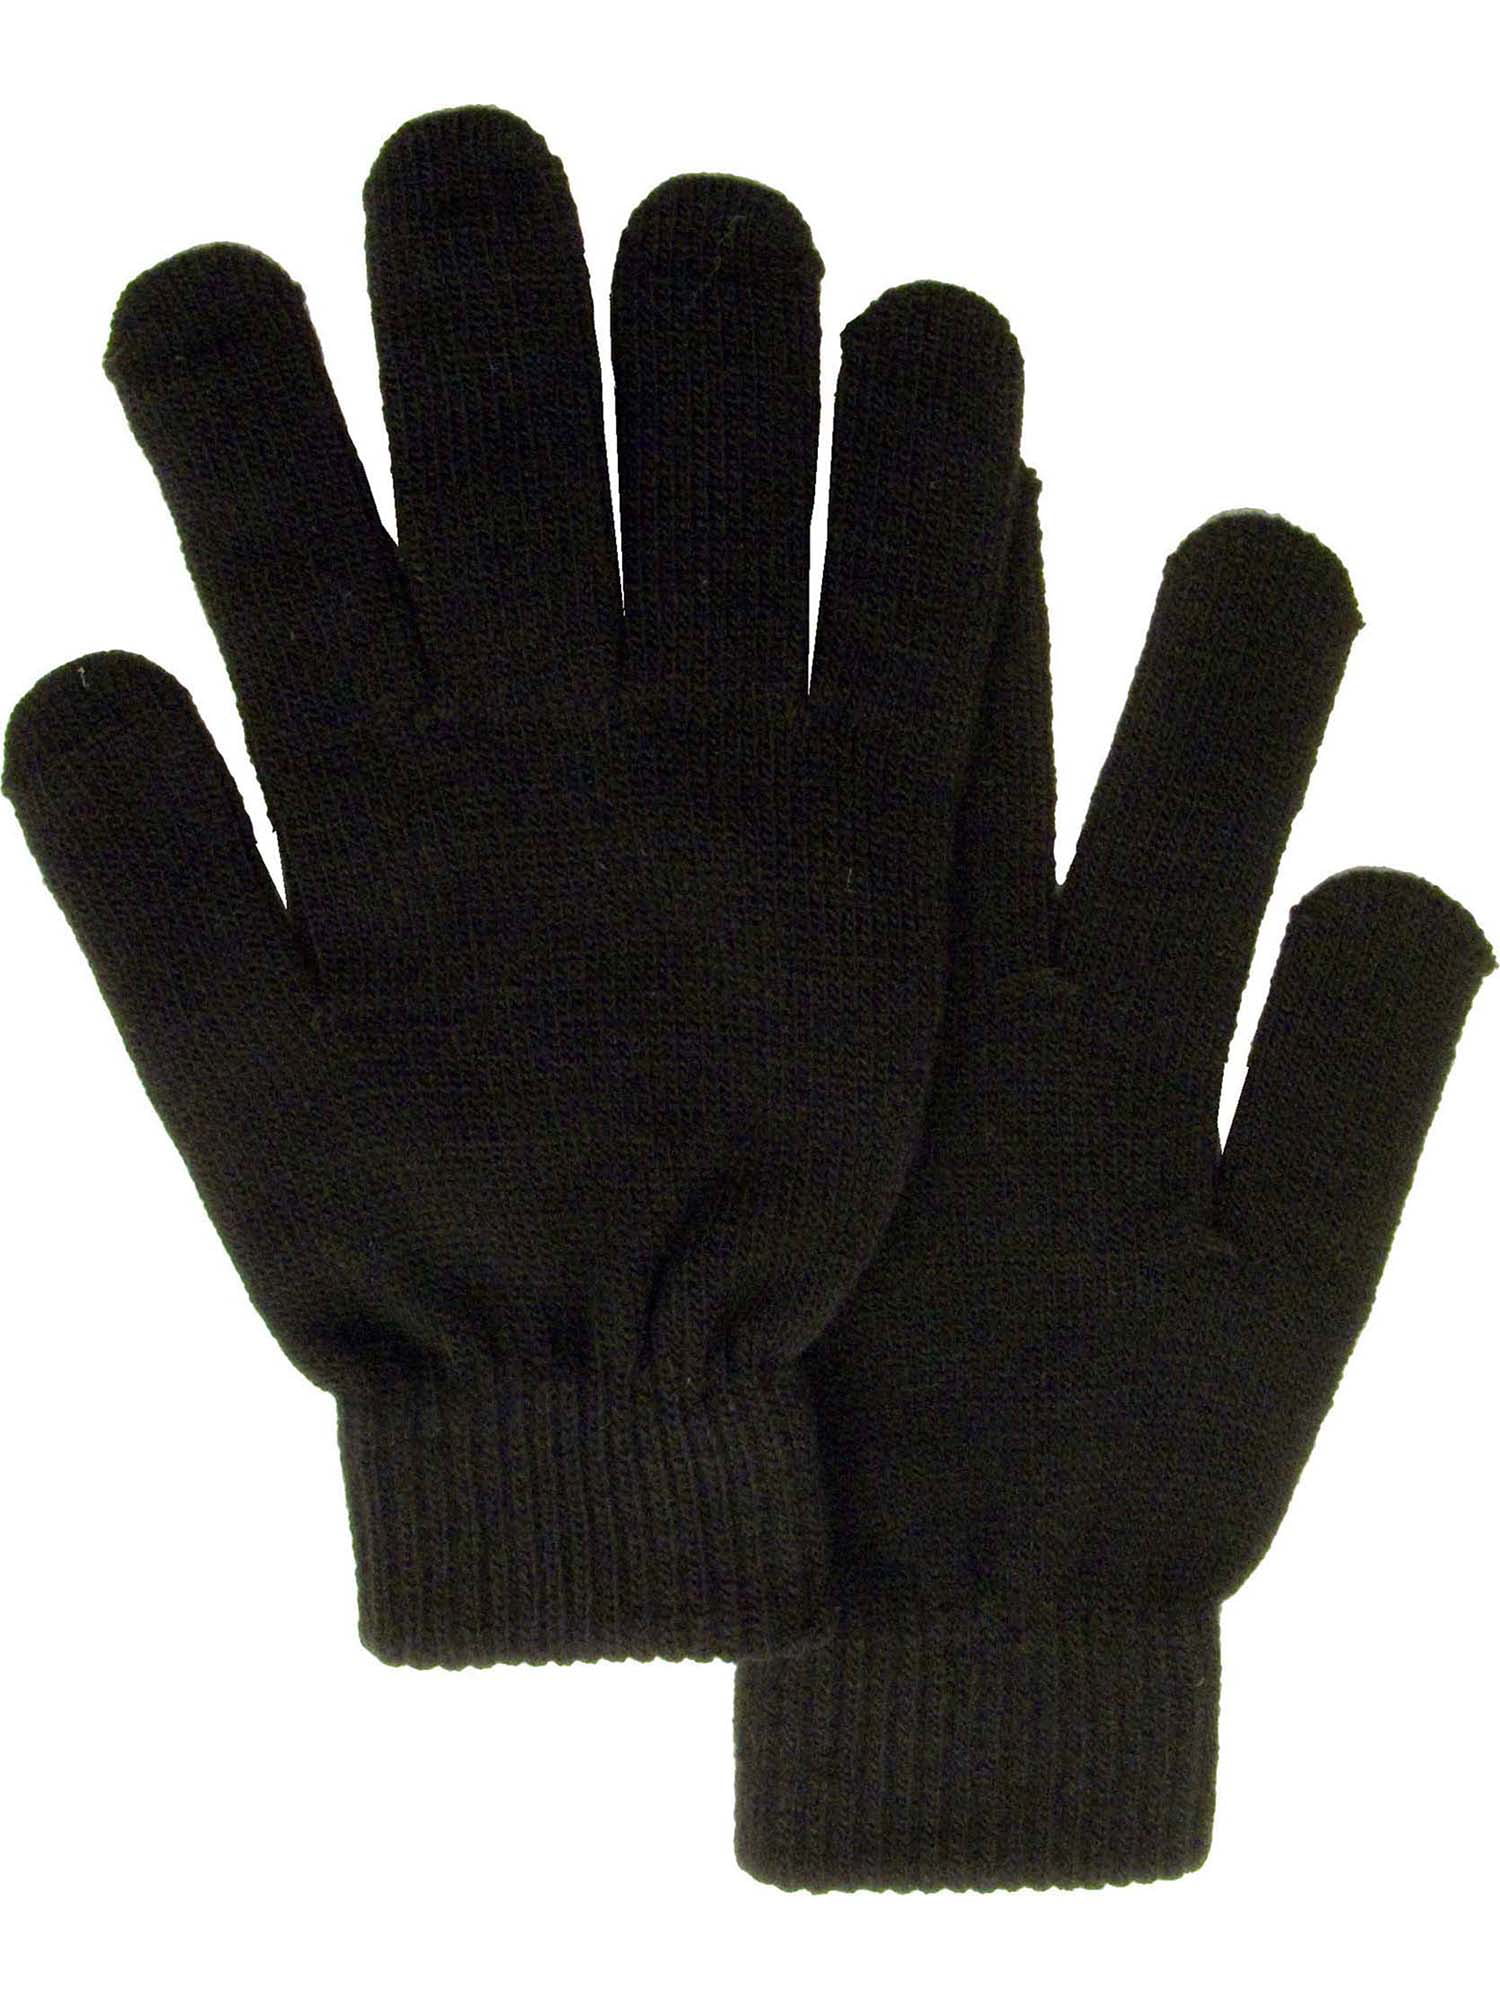 TH_ Men Women Magic Gloves & Mittens Stretchy Knitted Winter Warm Gloves Reliabl 